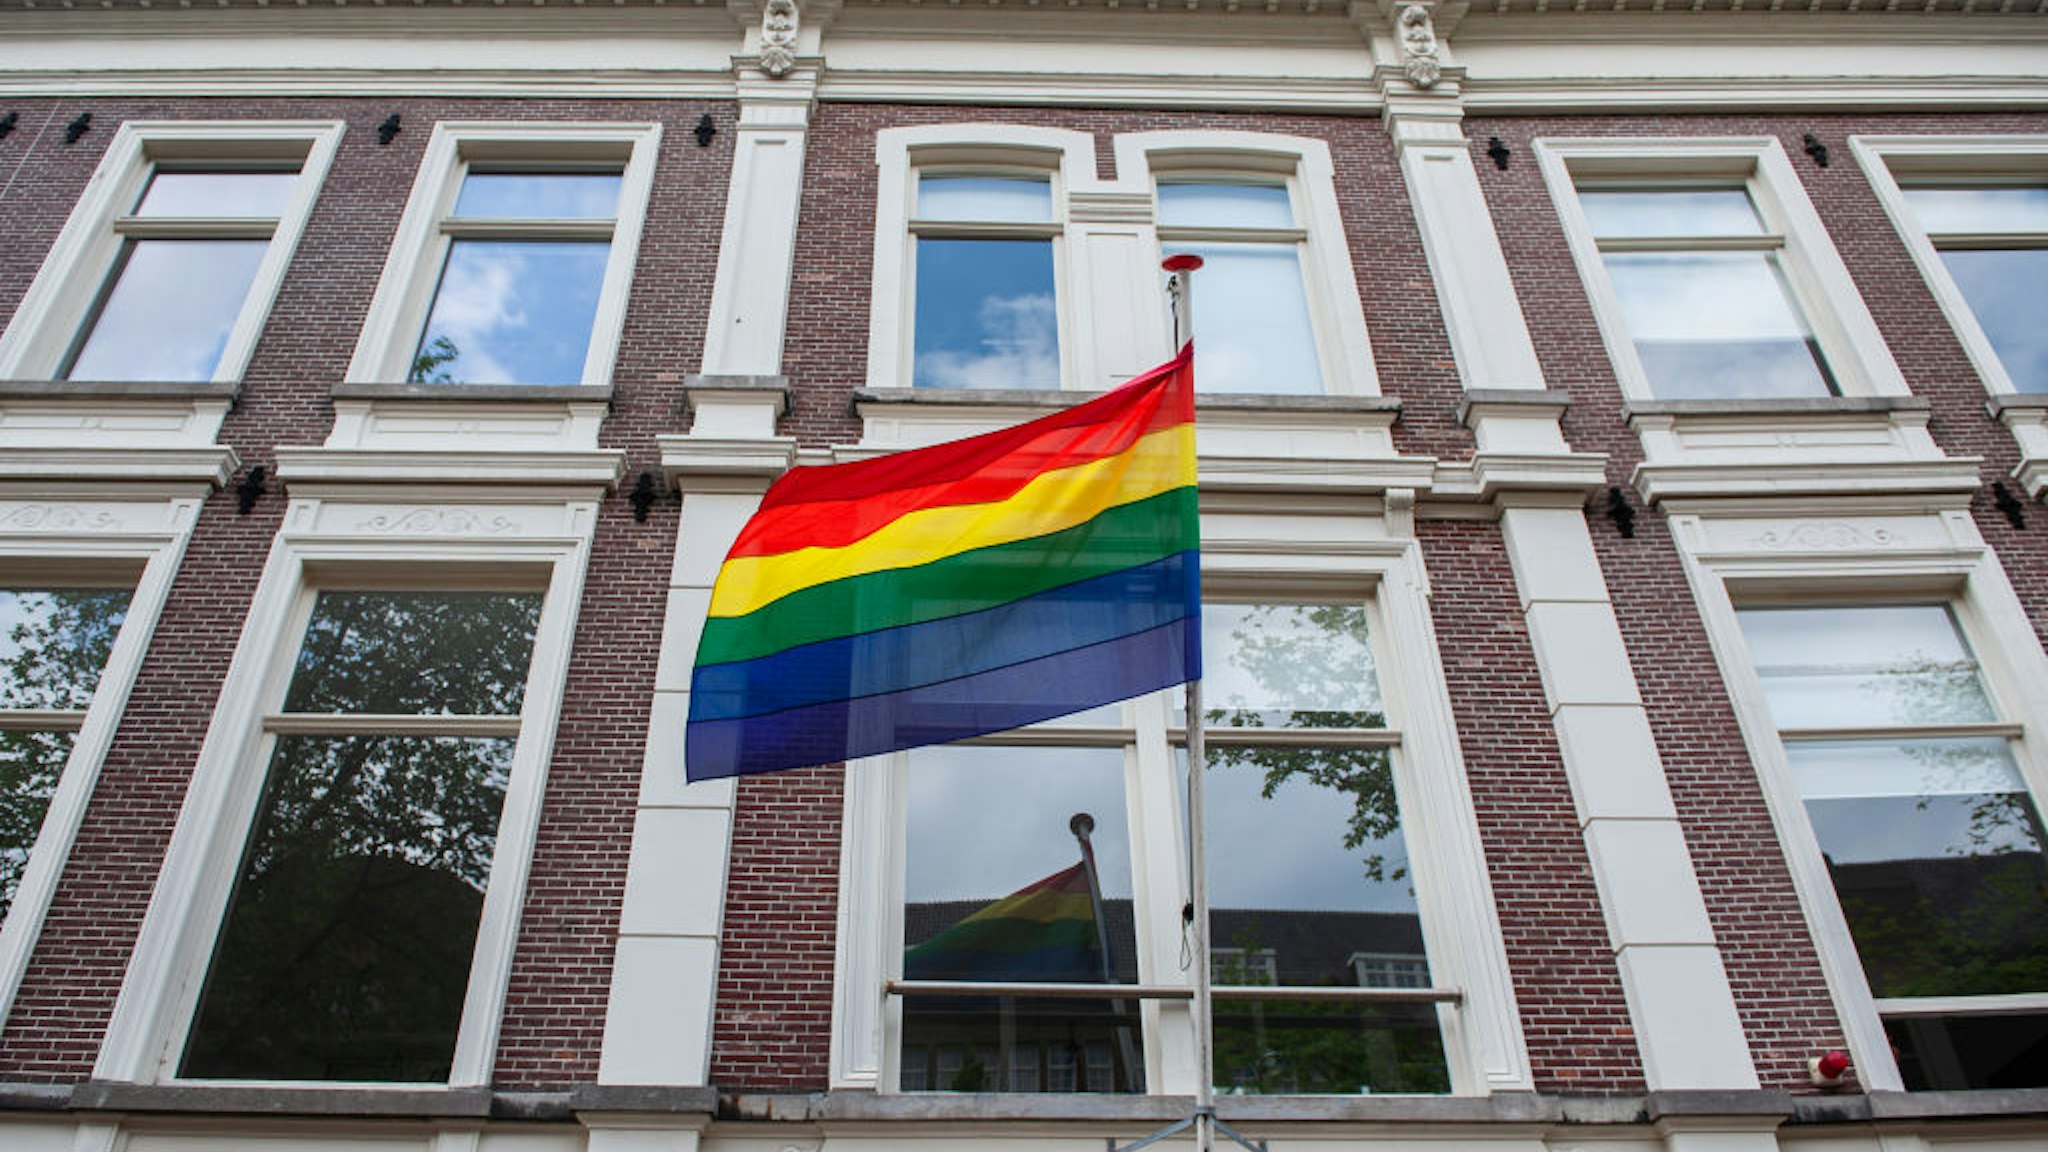 Several streets in the center of Amsterdam have been decorated with rainbow flags, during the Pride month celebrations in Amsterdam, on August 3rd, 2021.